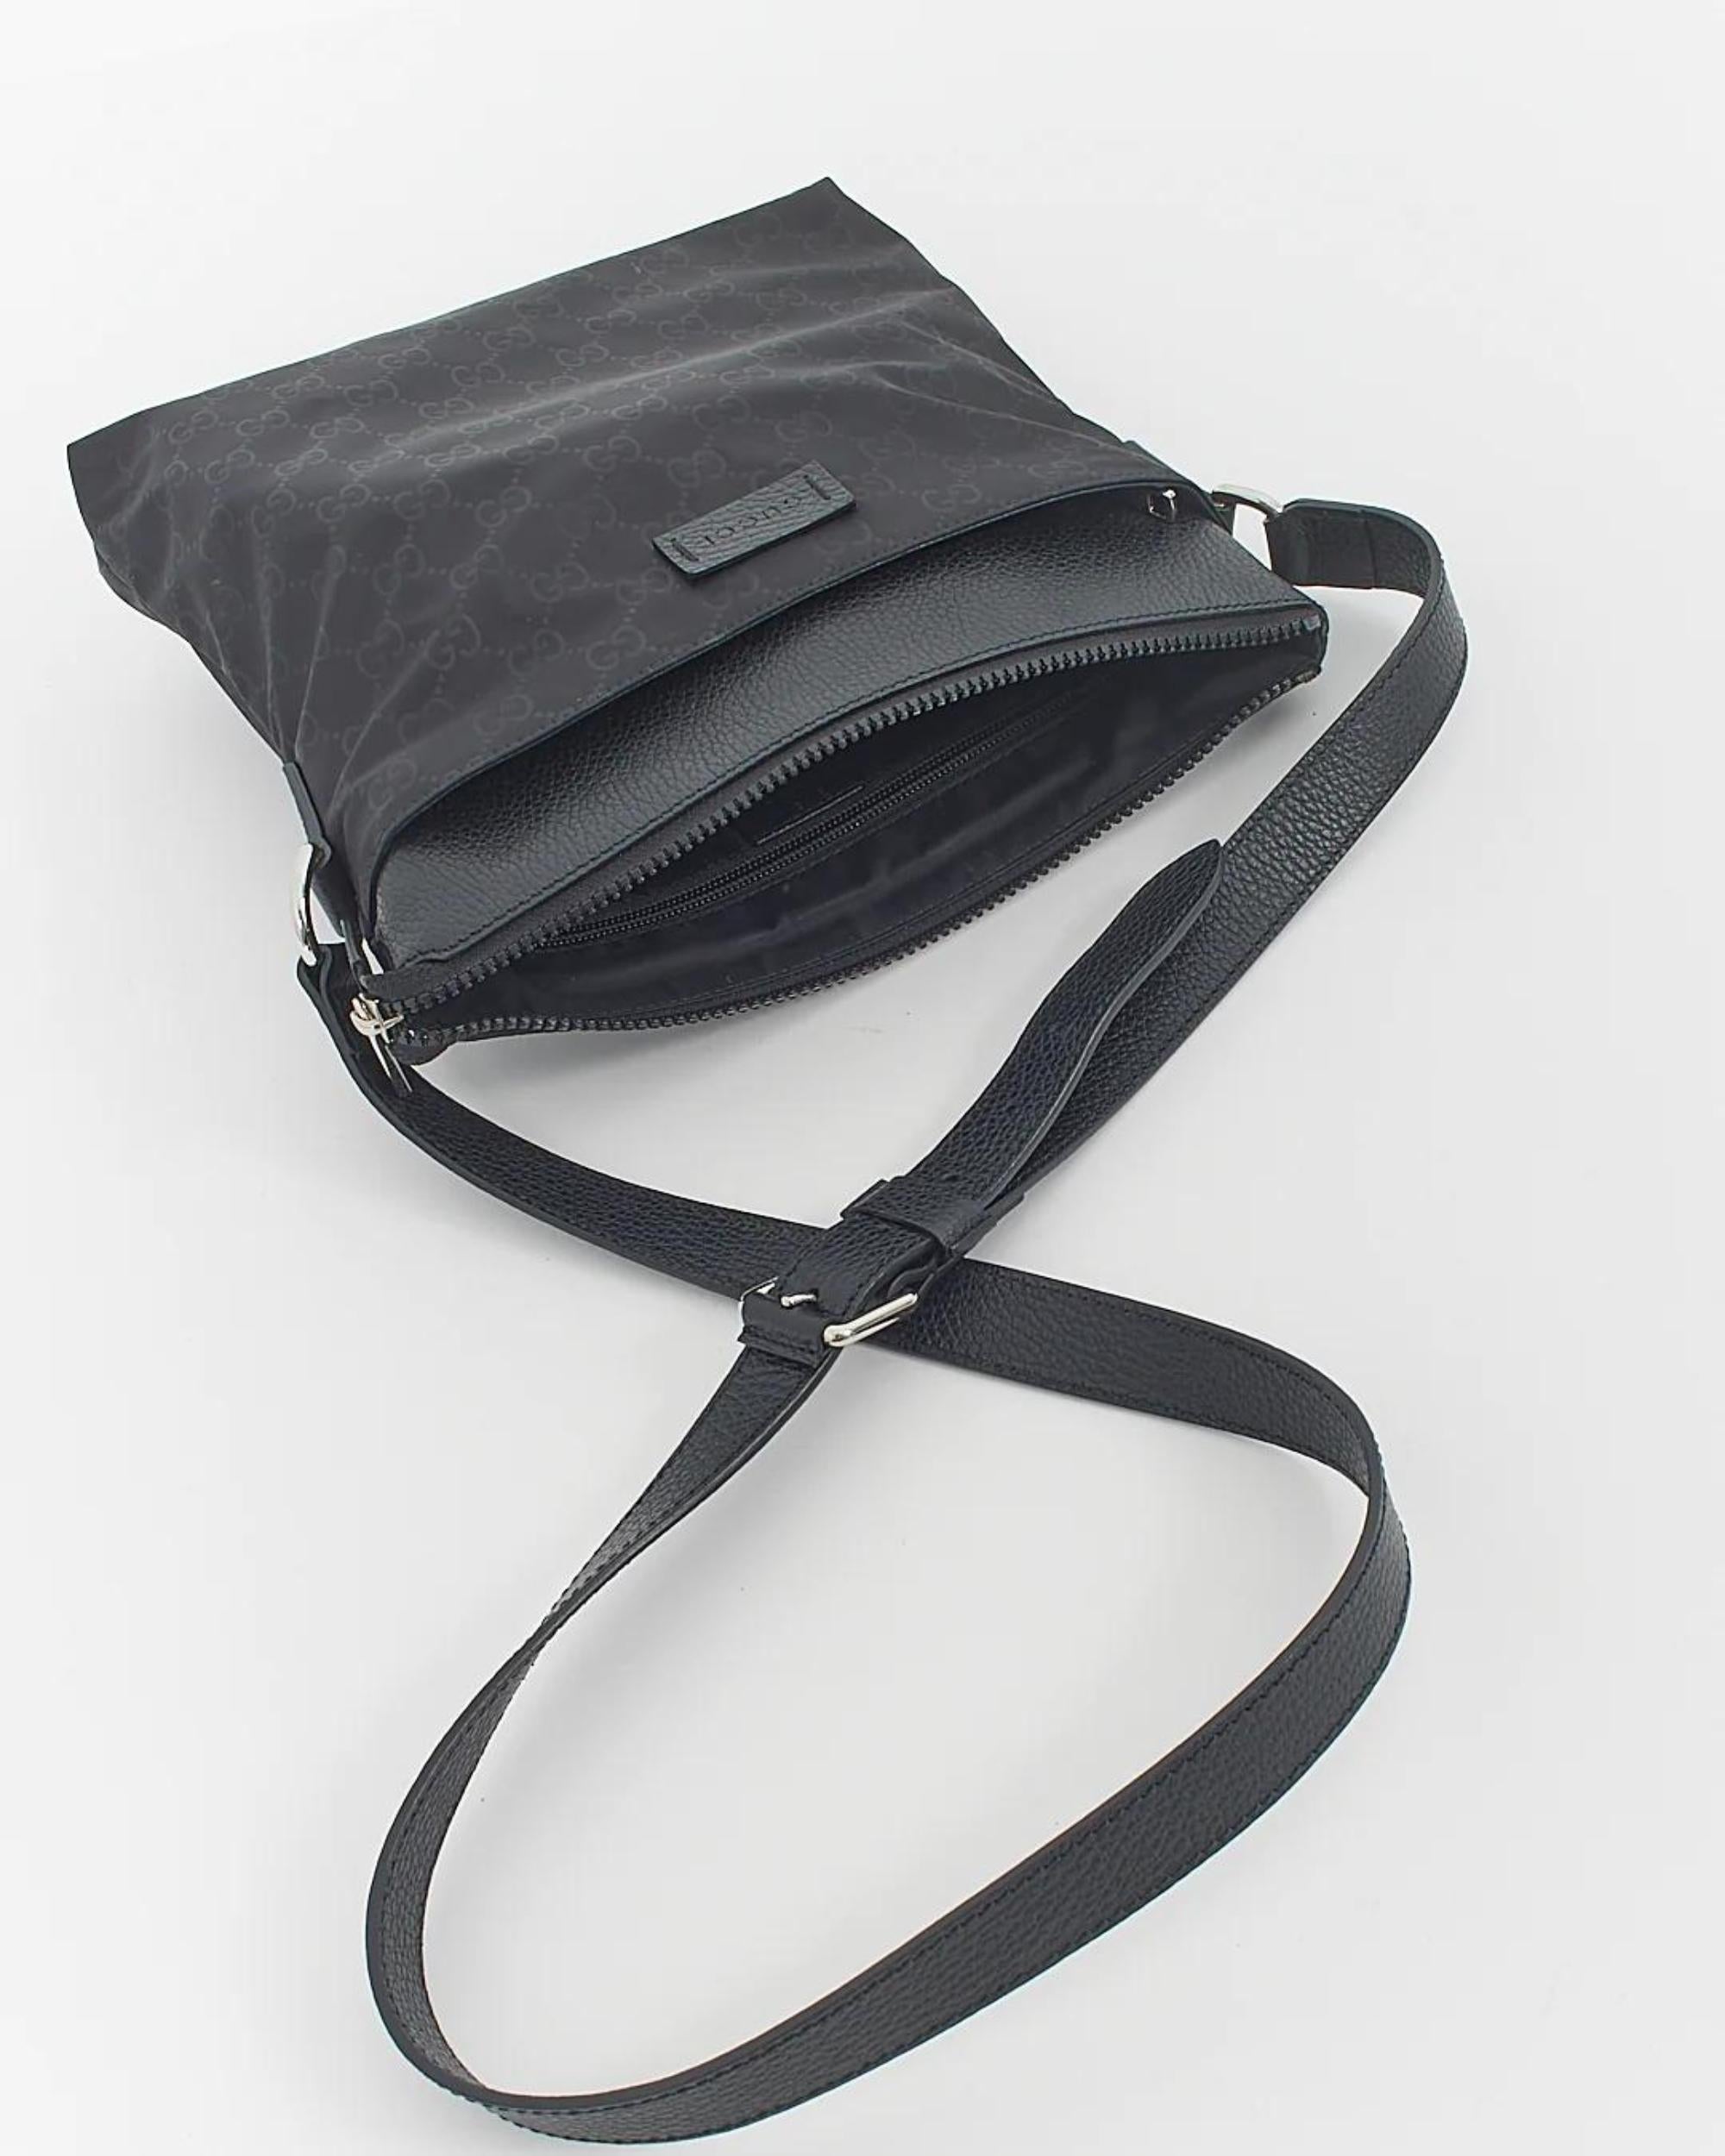 Gucci Black Nylon With Leather Trim Messenger Bag For Sale 2